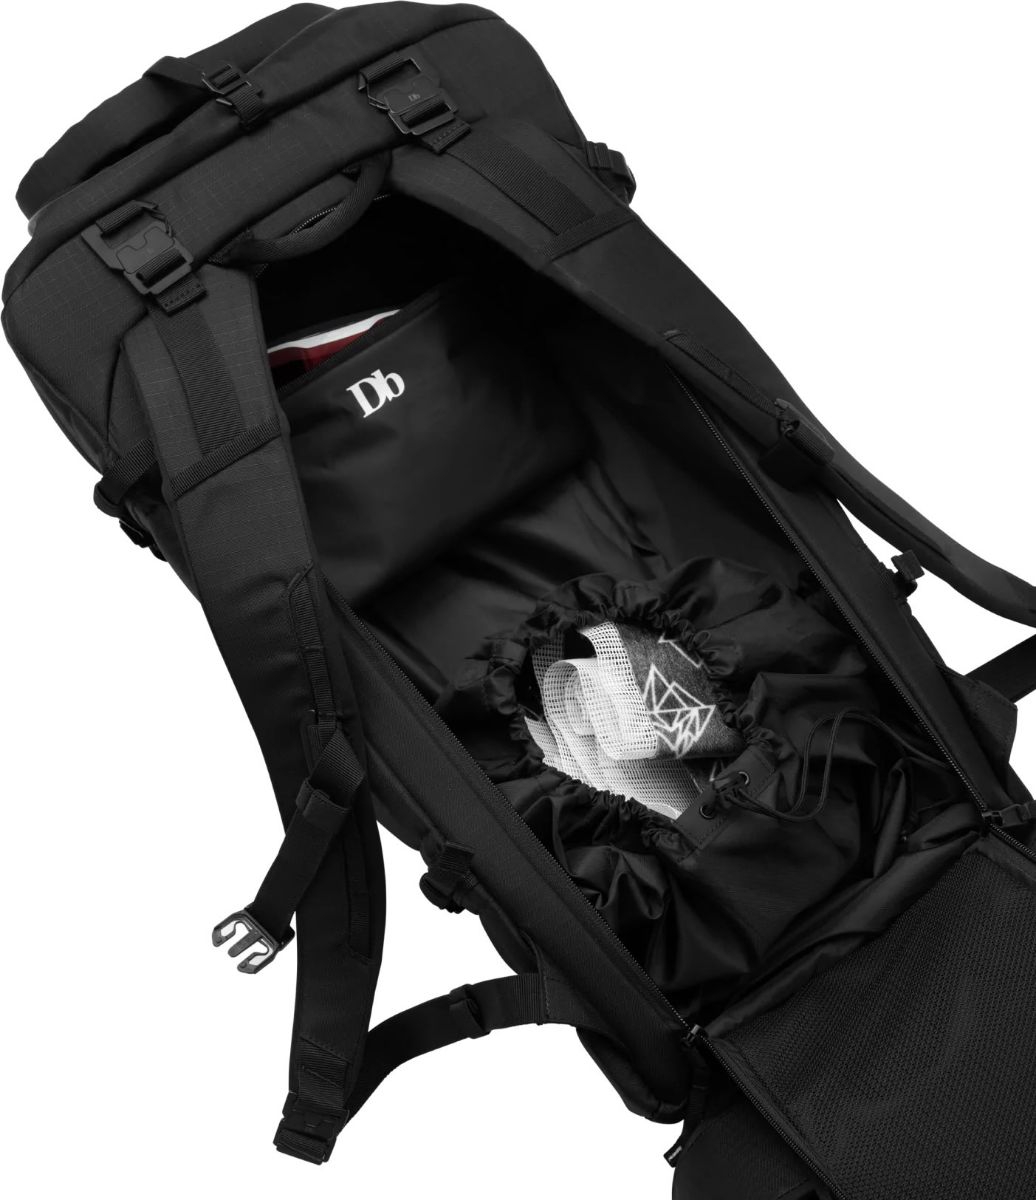 db-snow-backcountry-backpack-34l-black-out